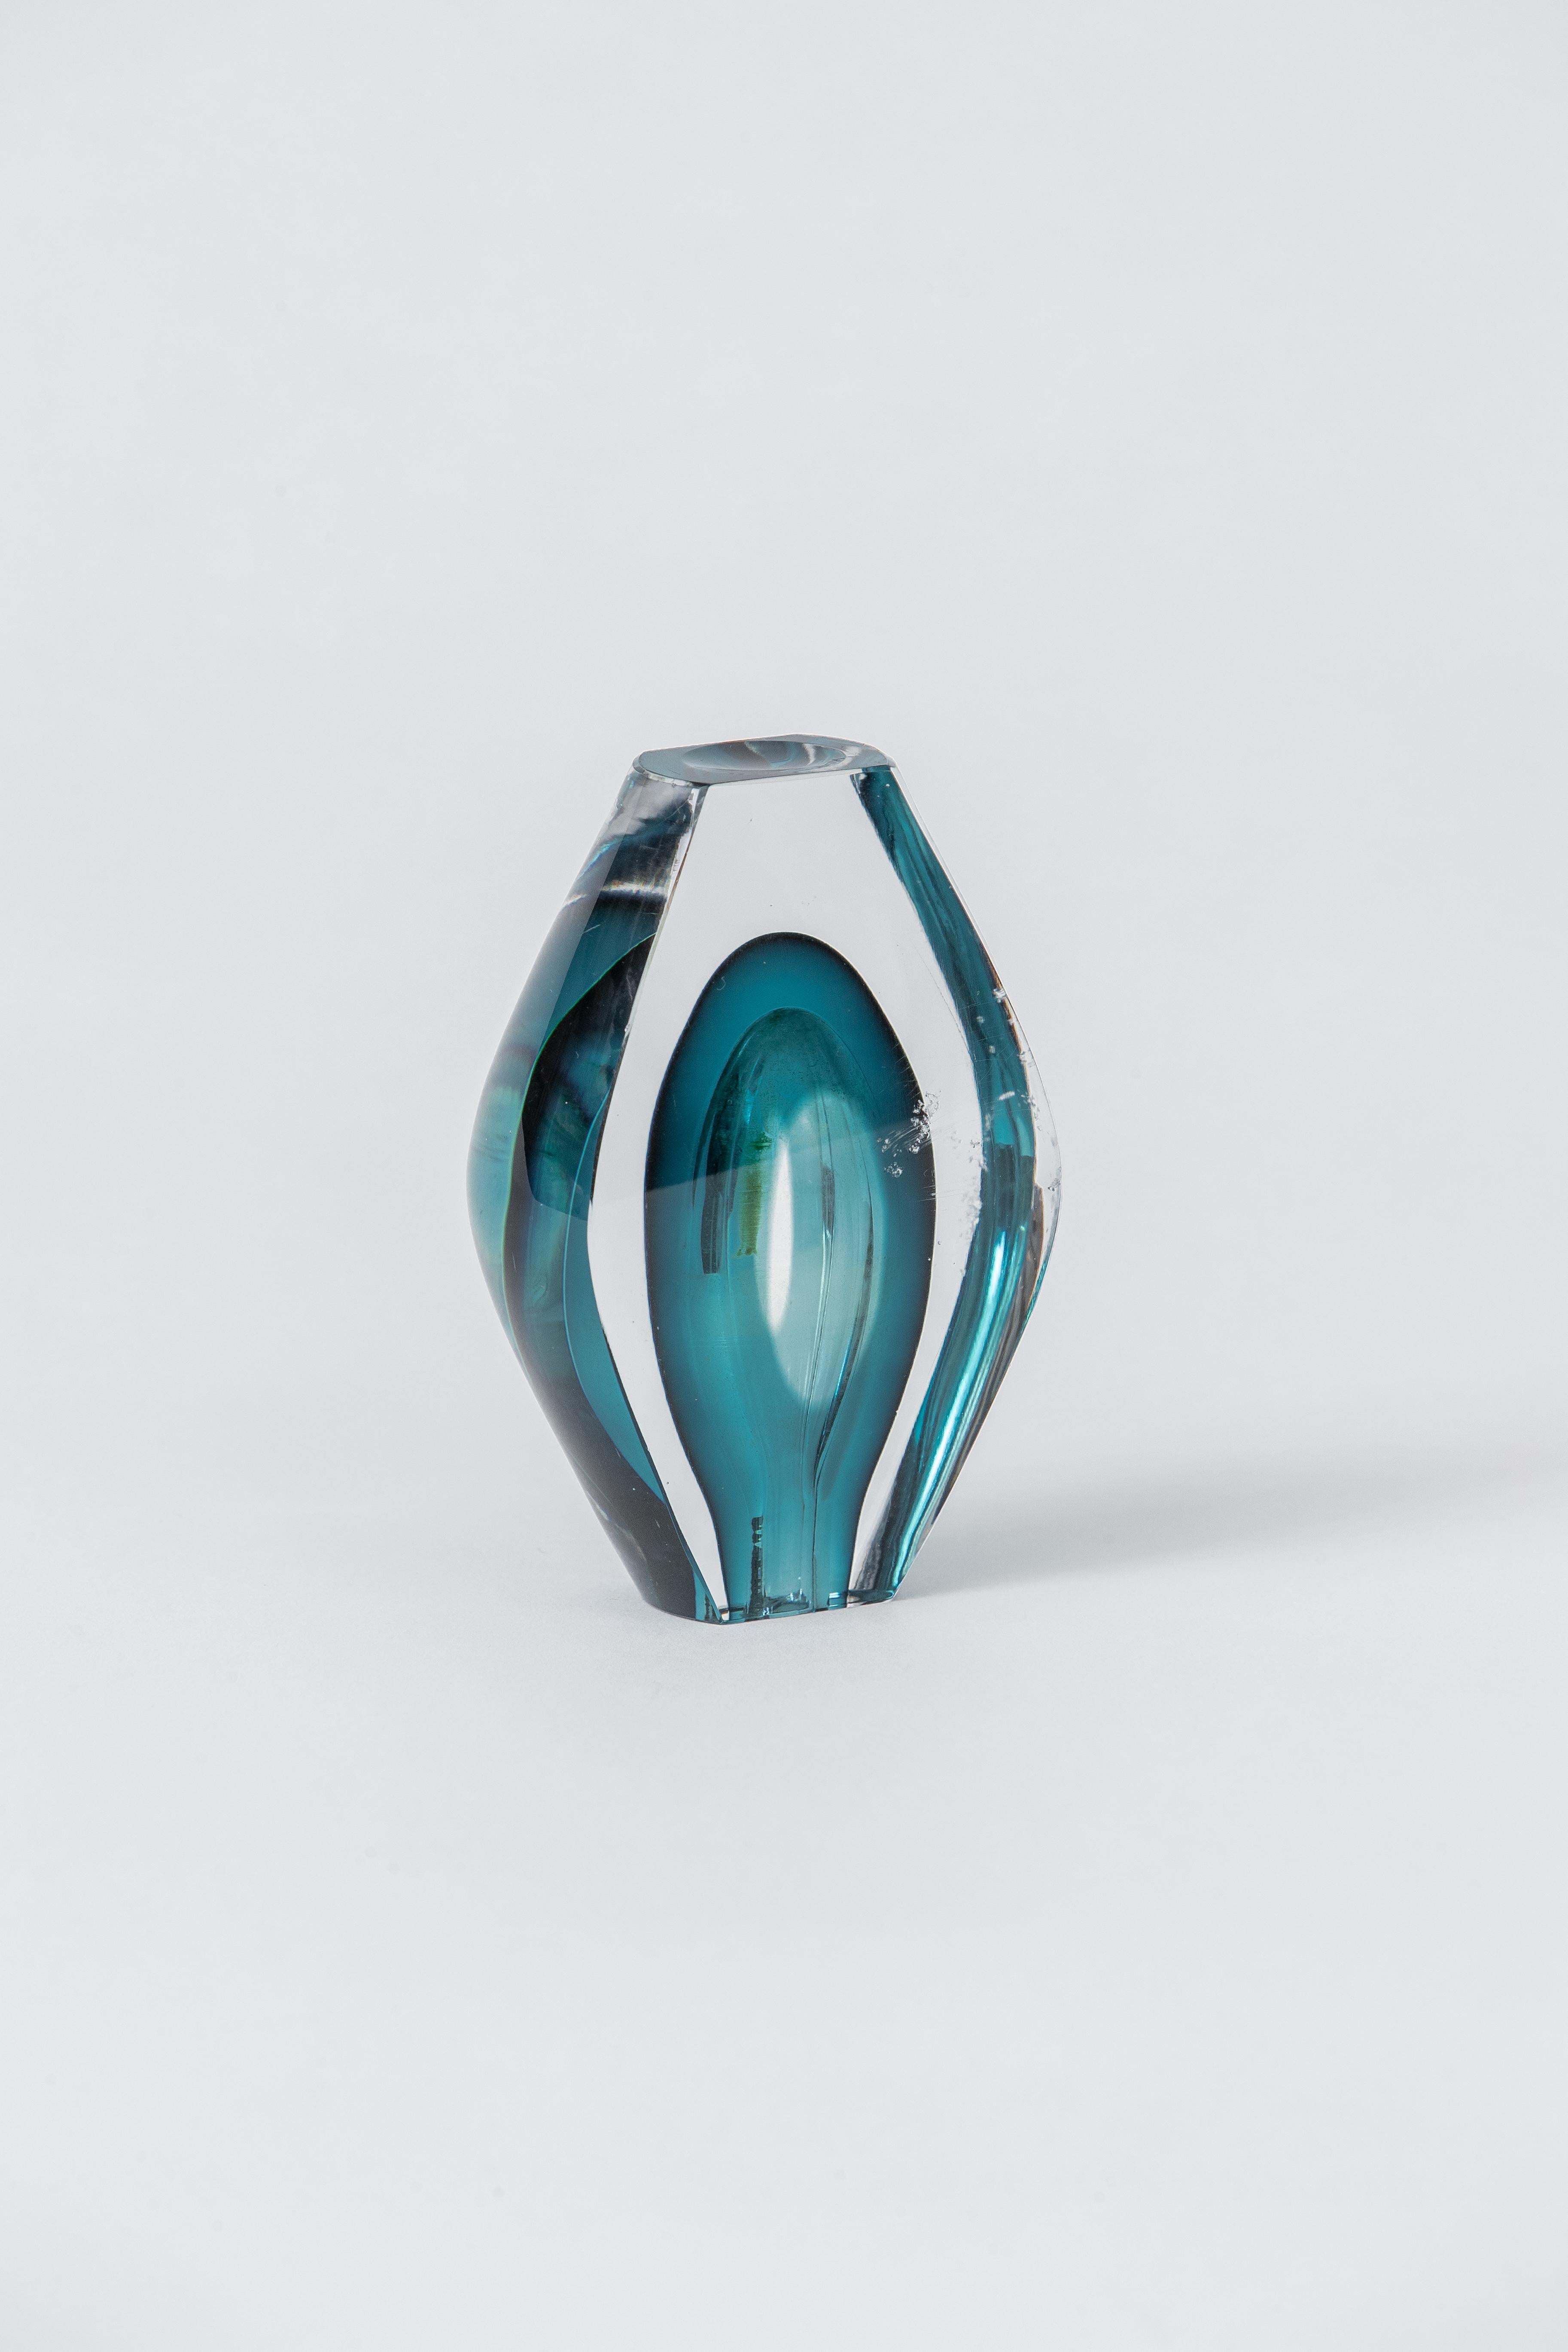 A Murano soliflore with blue accents, clear cast, its core is inlaid in blue with a clear 